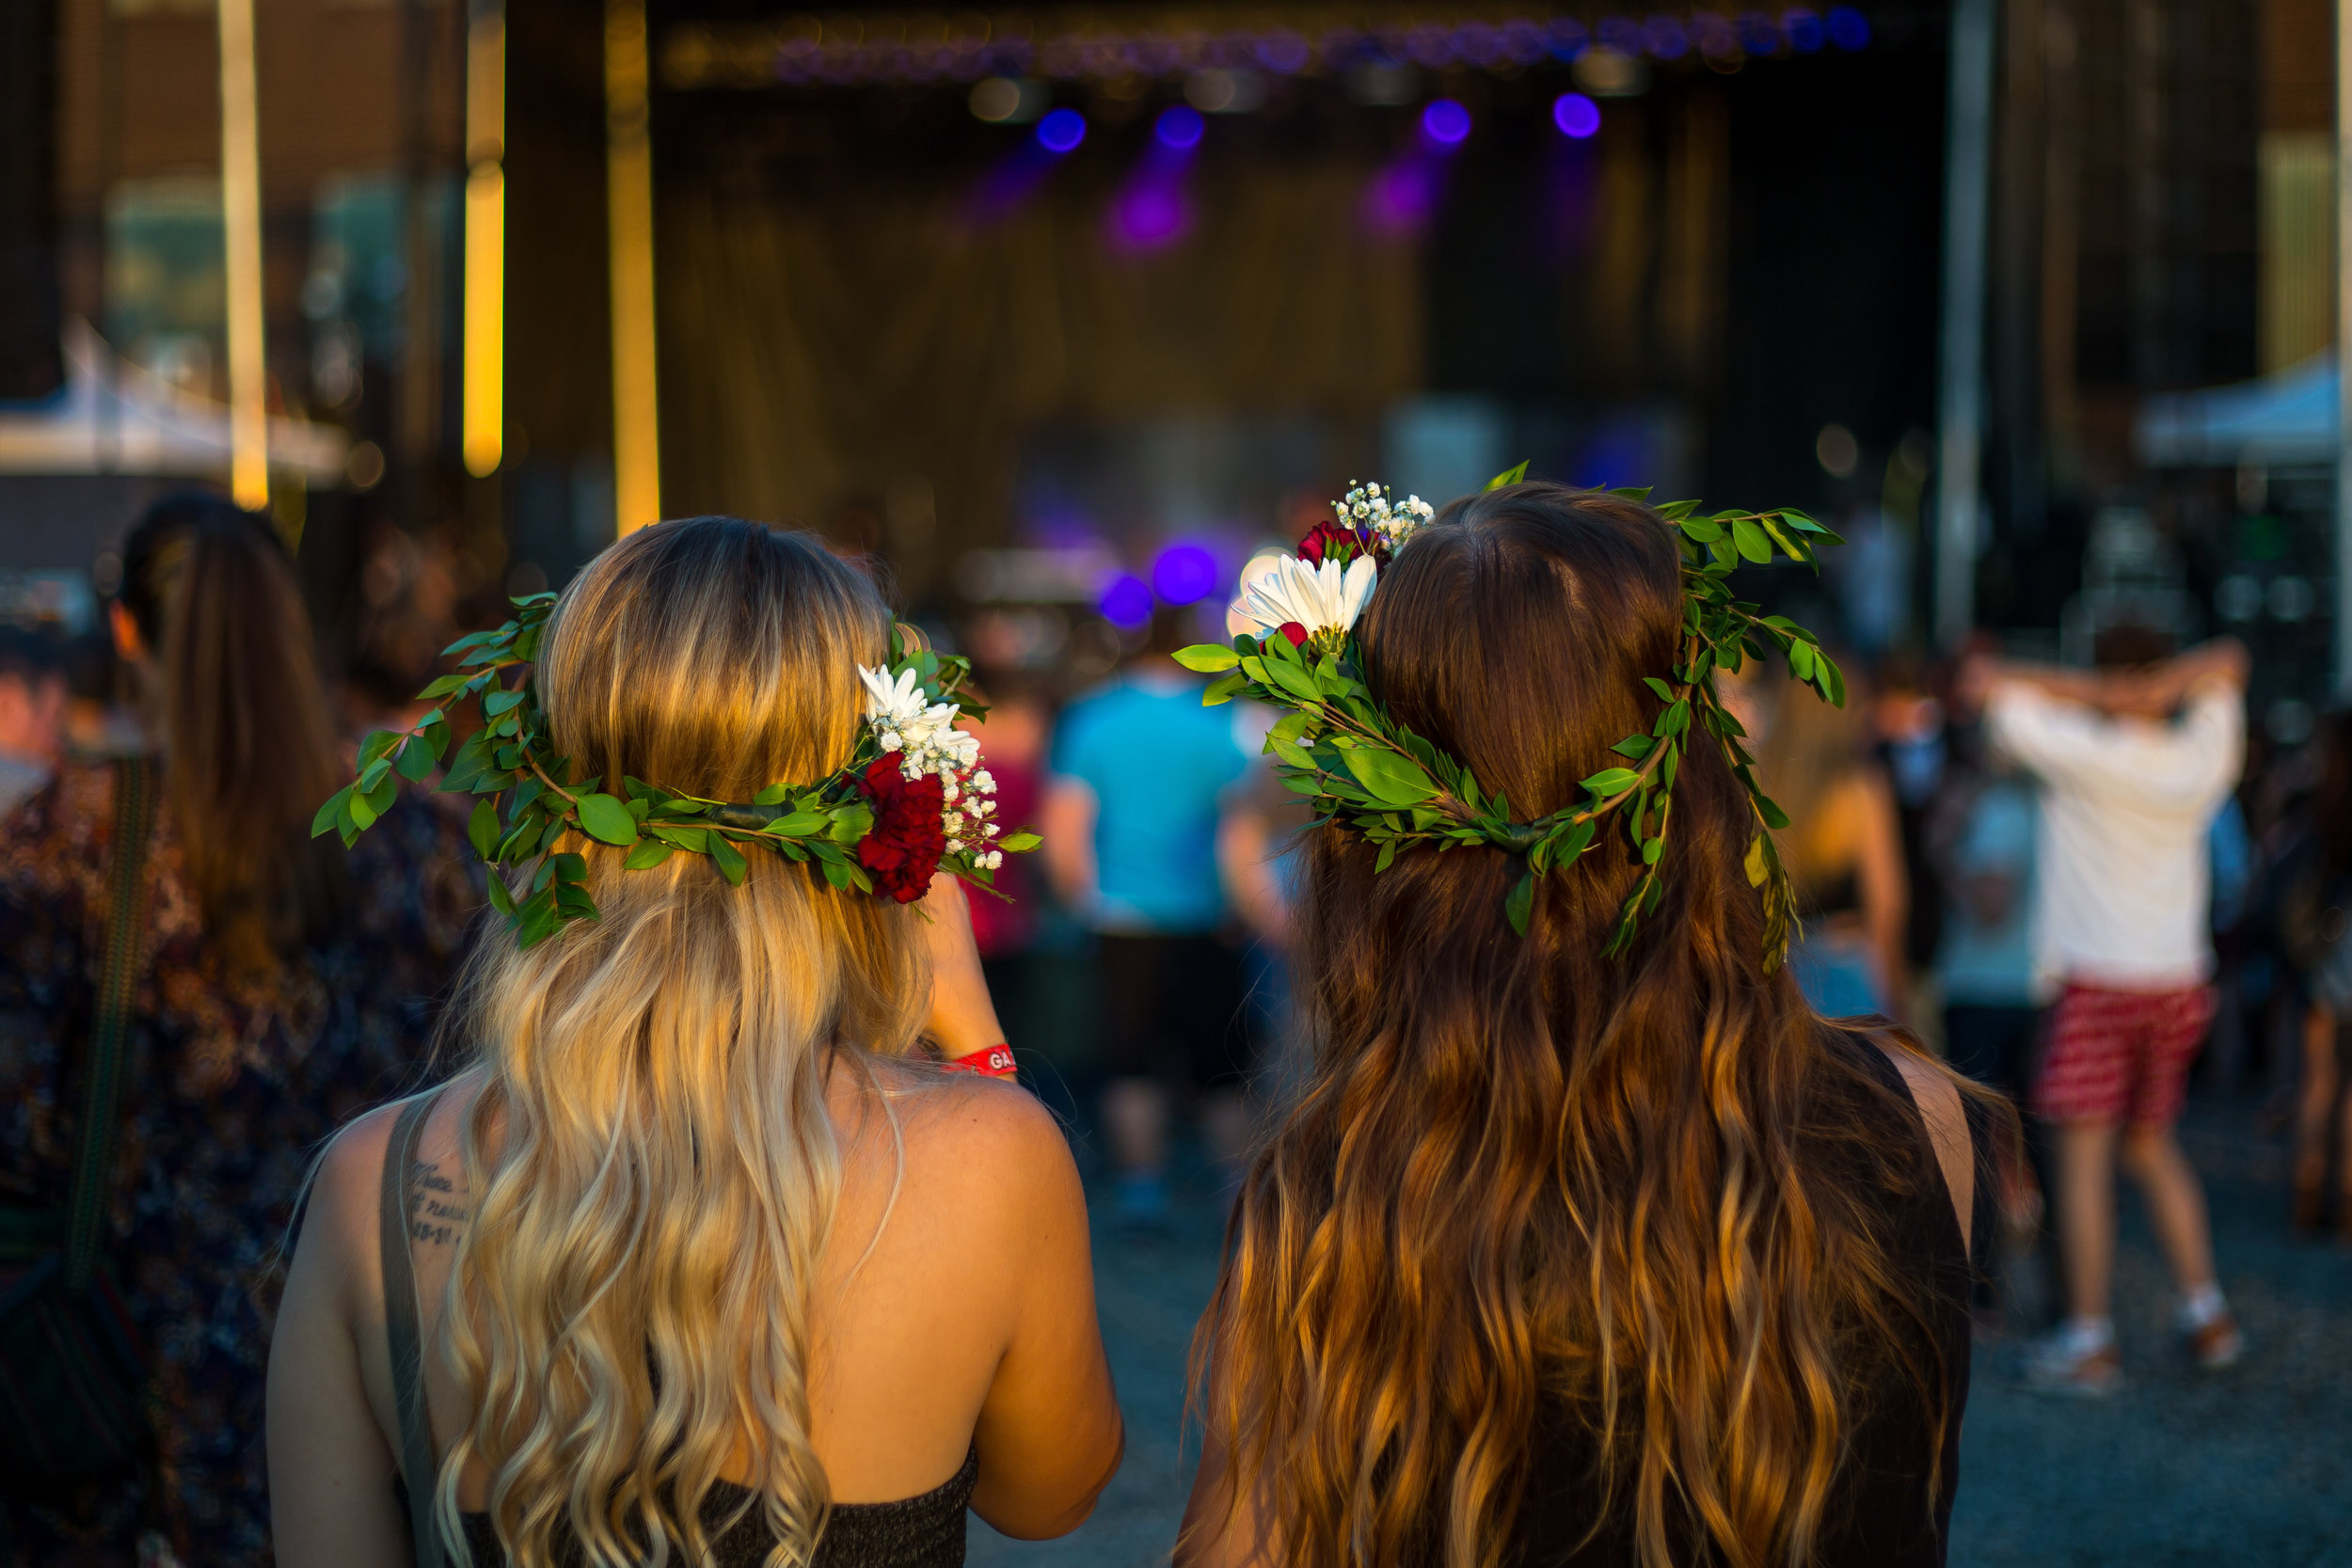  Sisters Christine, left and Gillian Mullias watch as Daya, a local singer and songwriter, preforms on stage on day one of Thrival Music Festival in Rankin on Friday evening.  